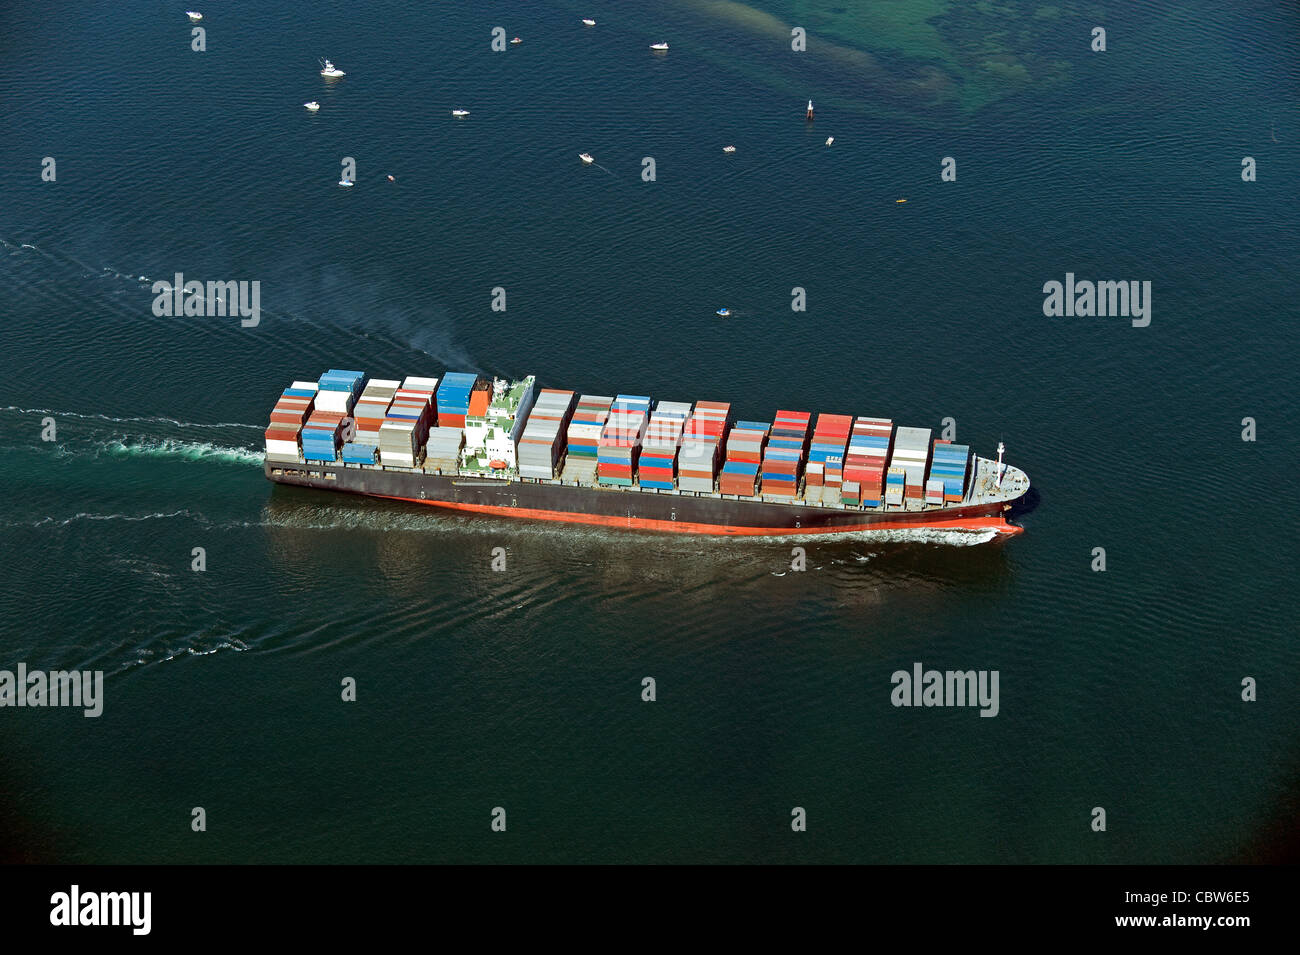 Ship with containers on the sea Stock Photo